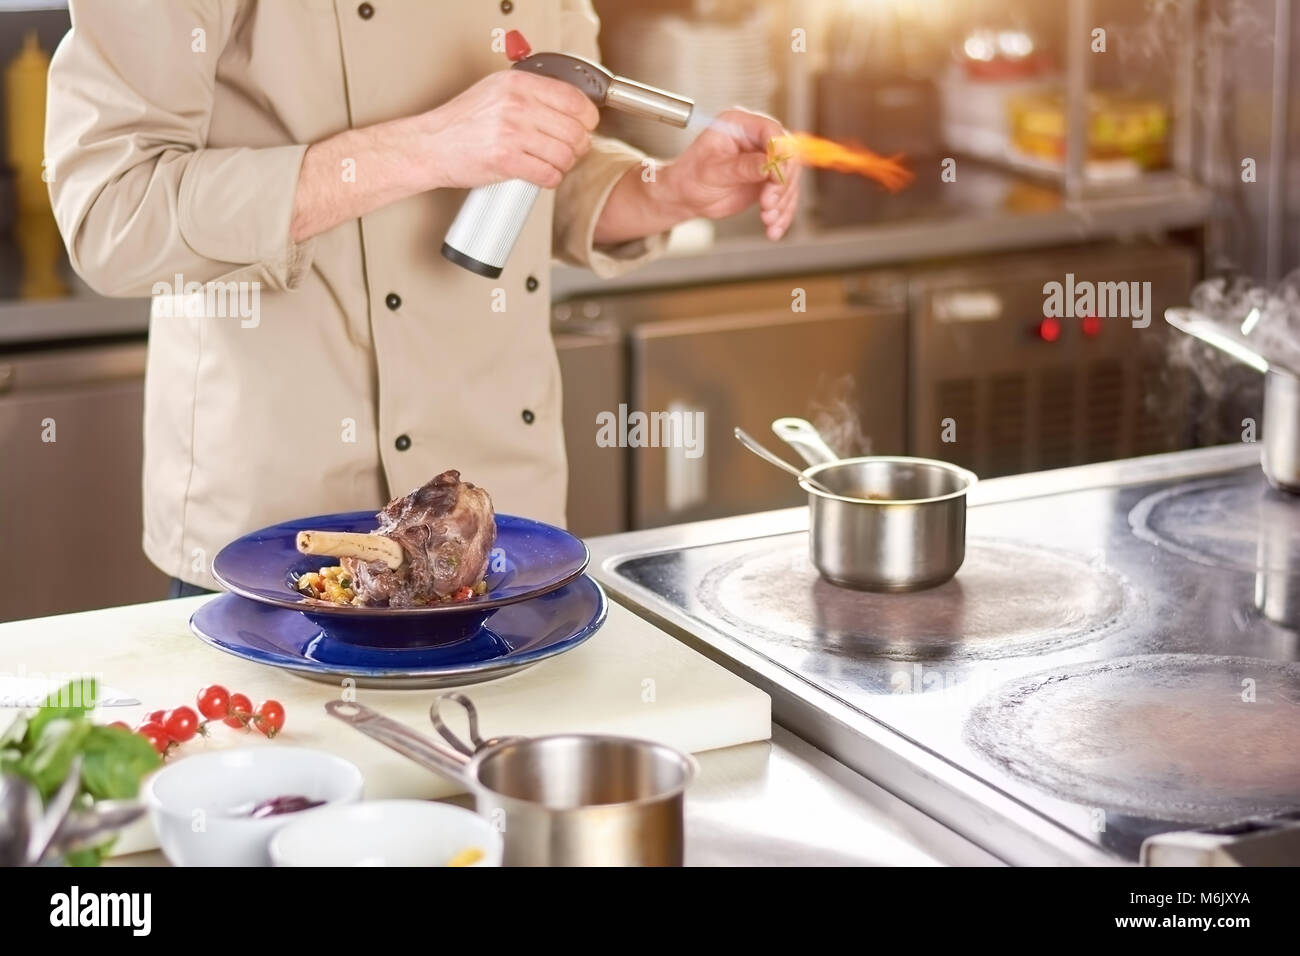 Chef hands holding torch burner. Stock Photo